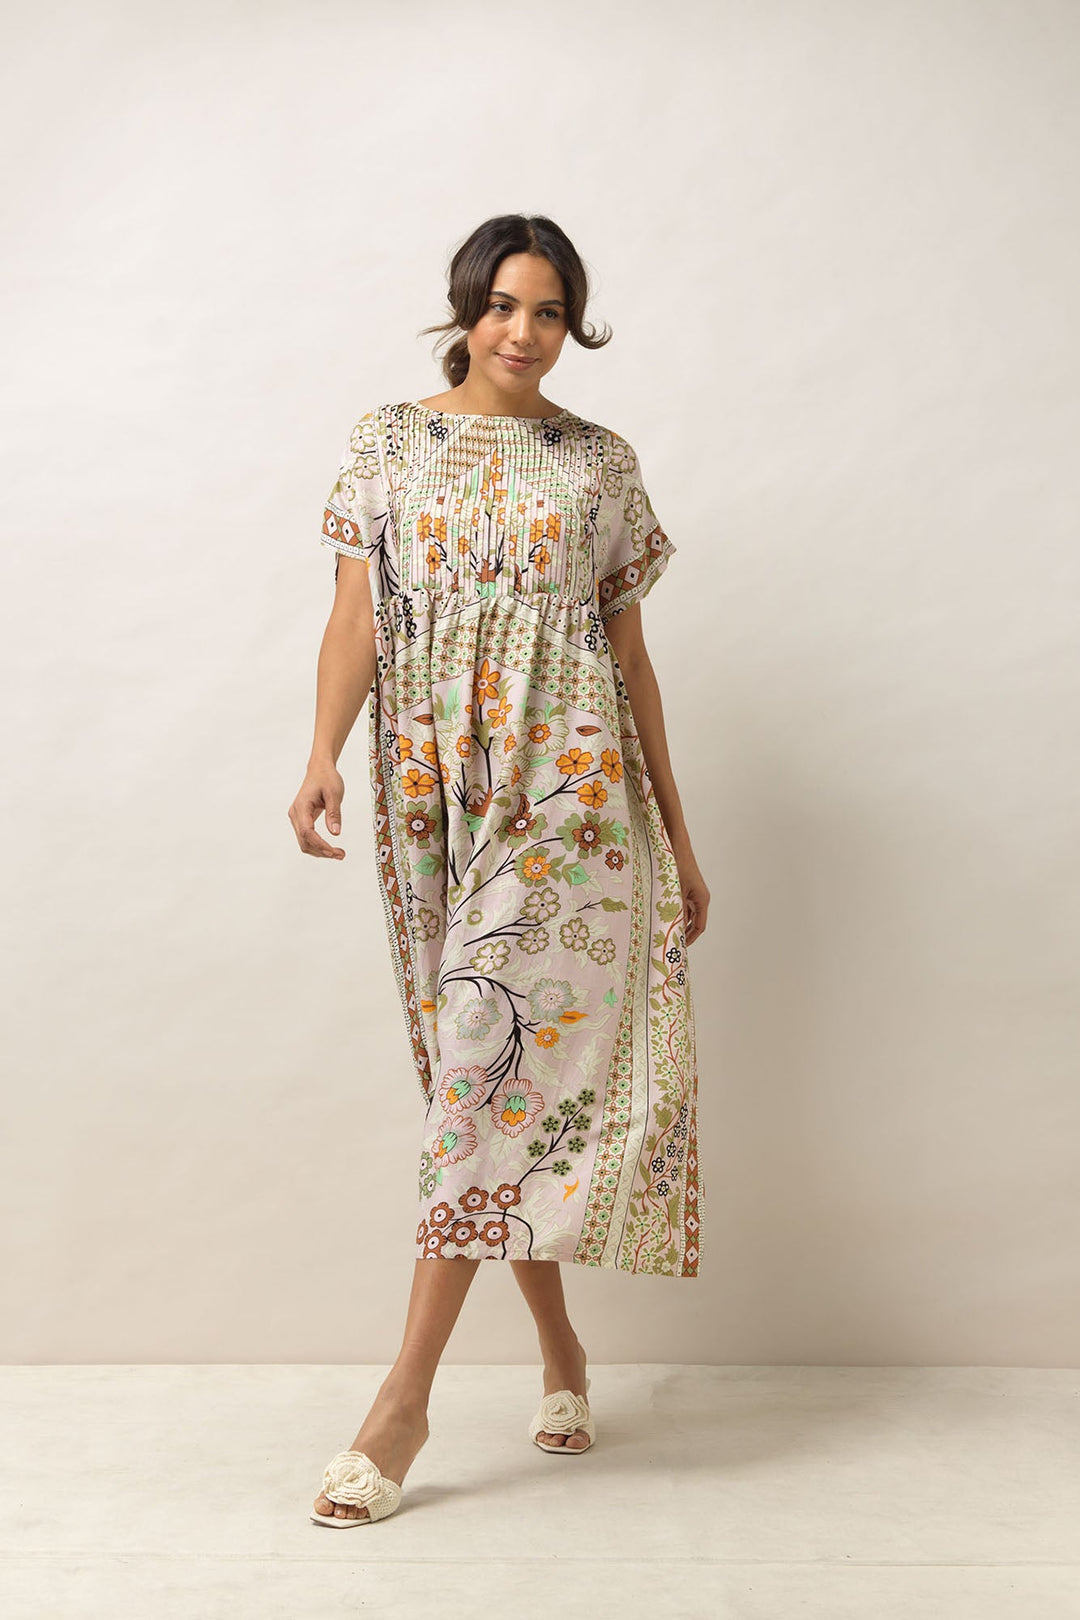 Women's short sleeve pleated dress in flower floral arch sage print by One Hundred Stars